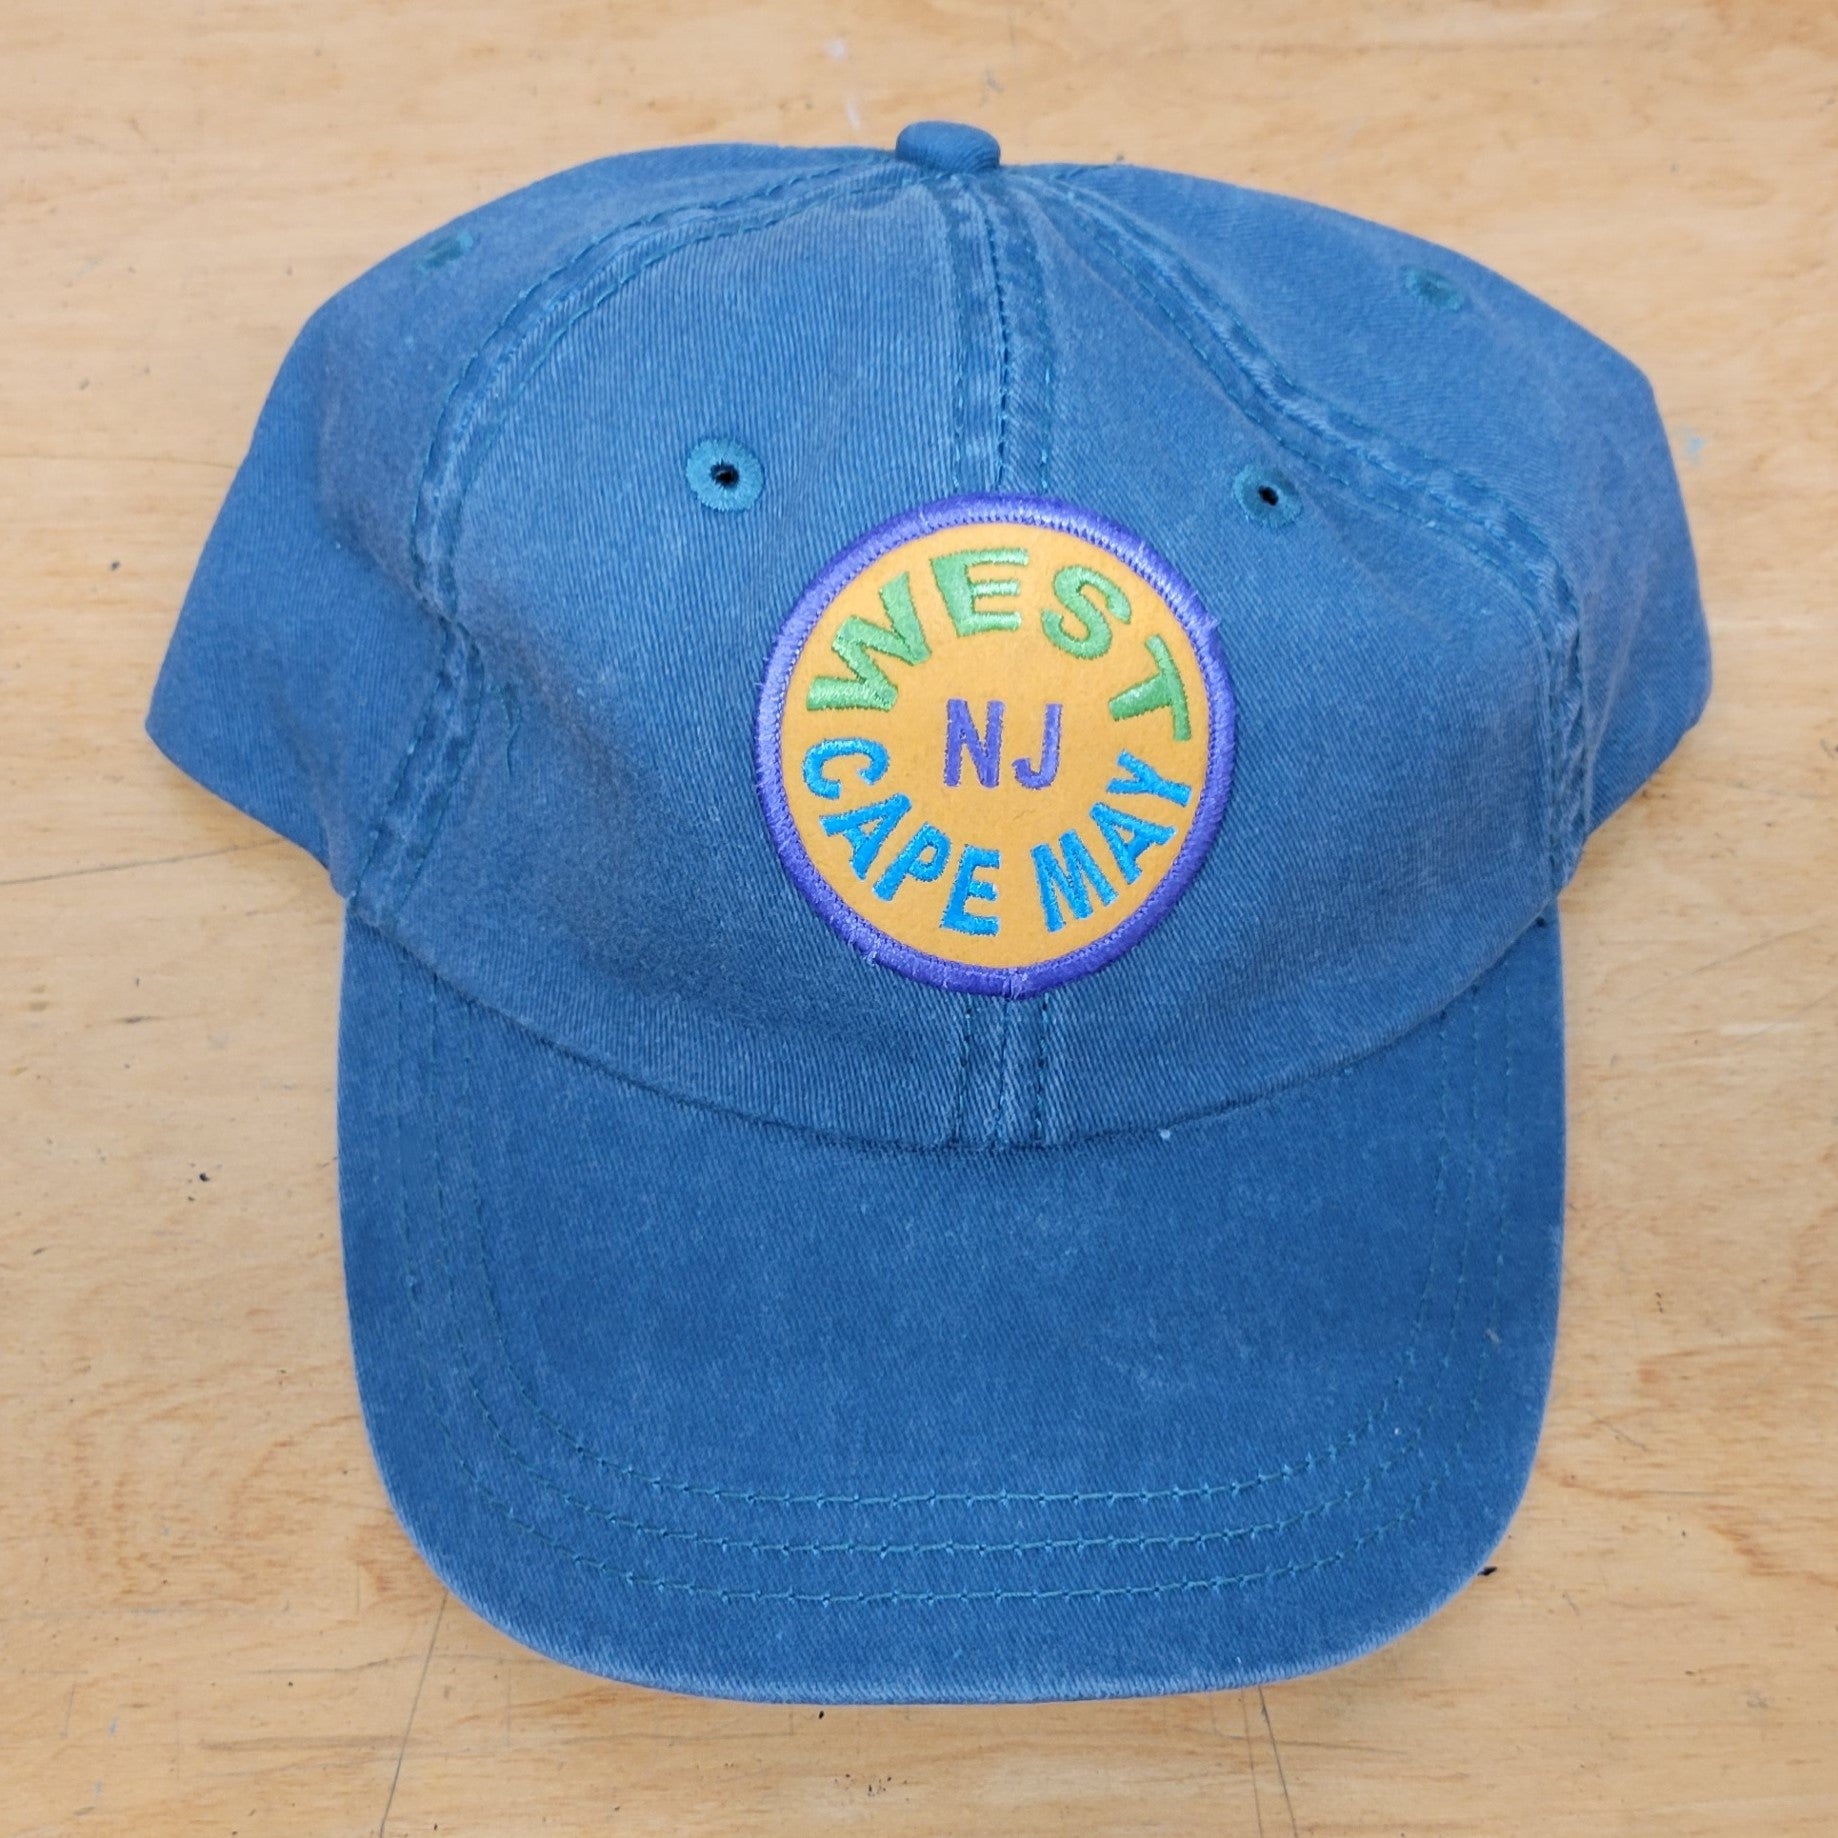 A blue, classic hat with a 'West Cape May' patch on it.